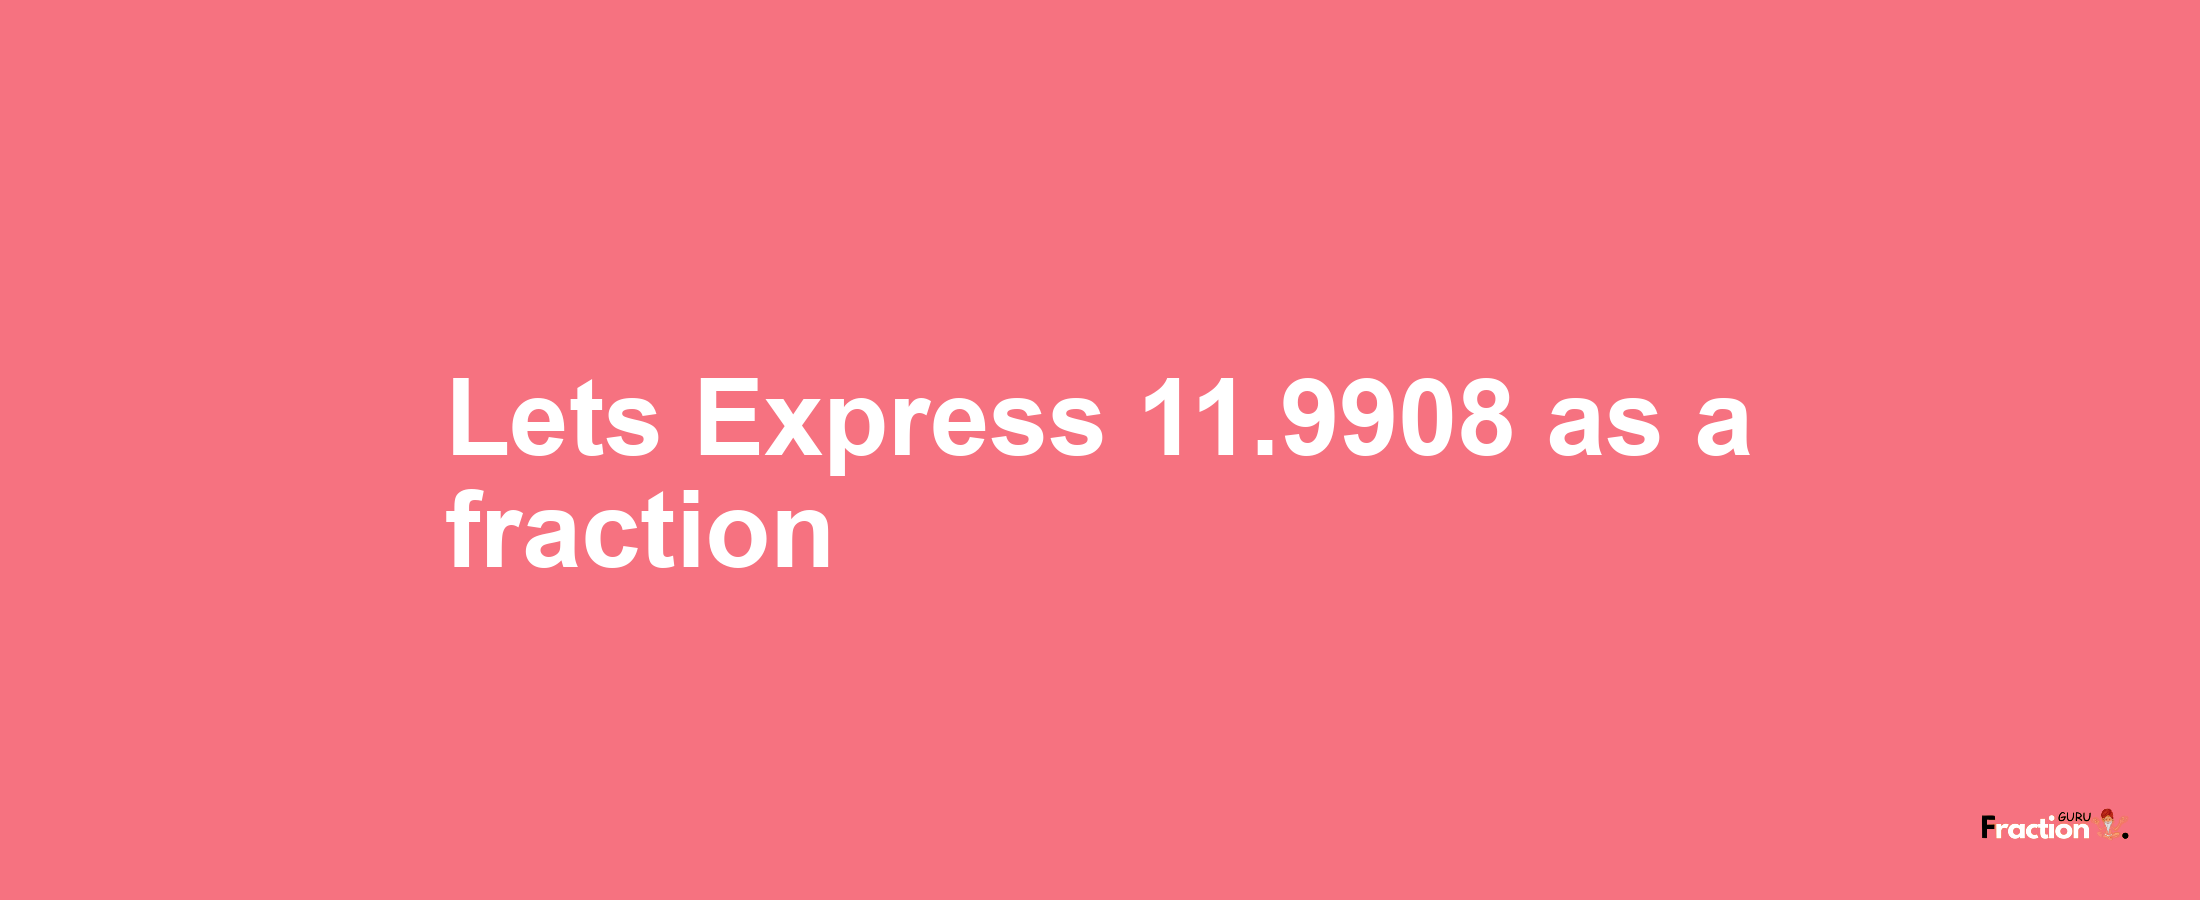 Lets Express 11.9908 as afraction